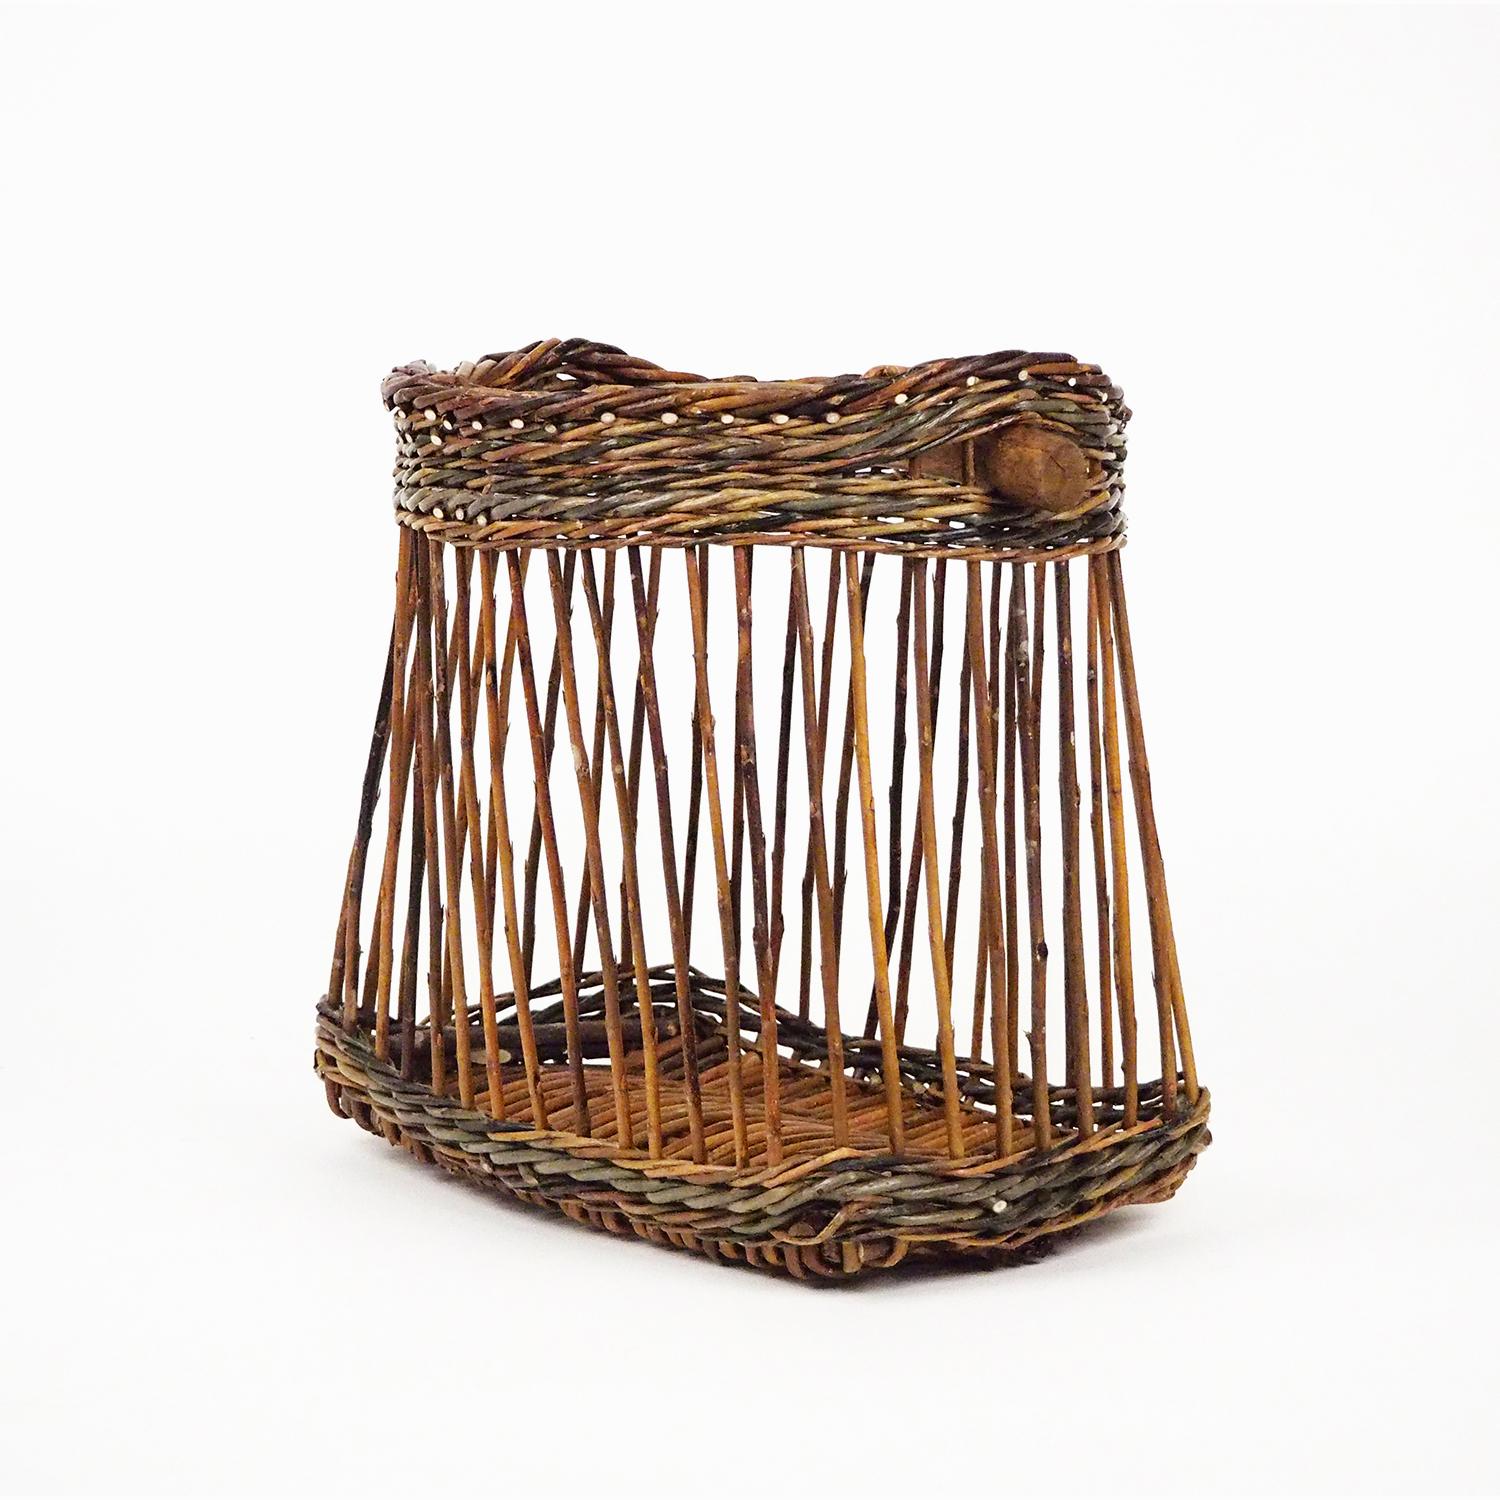 Niche is a basket made from willows harvested in Vicenza area, Italy.
Mario Brocchi is the maker who grows and weaving this natural material, extremely as flexible when it's wet as very durable and hard when dried.

This basket has a special